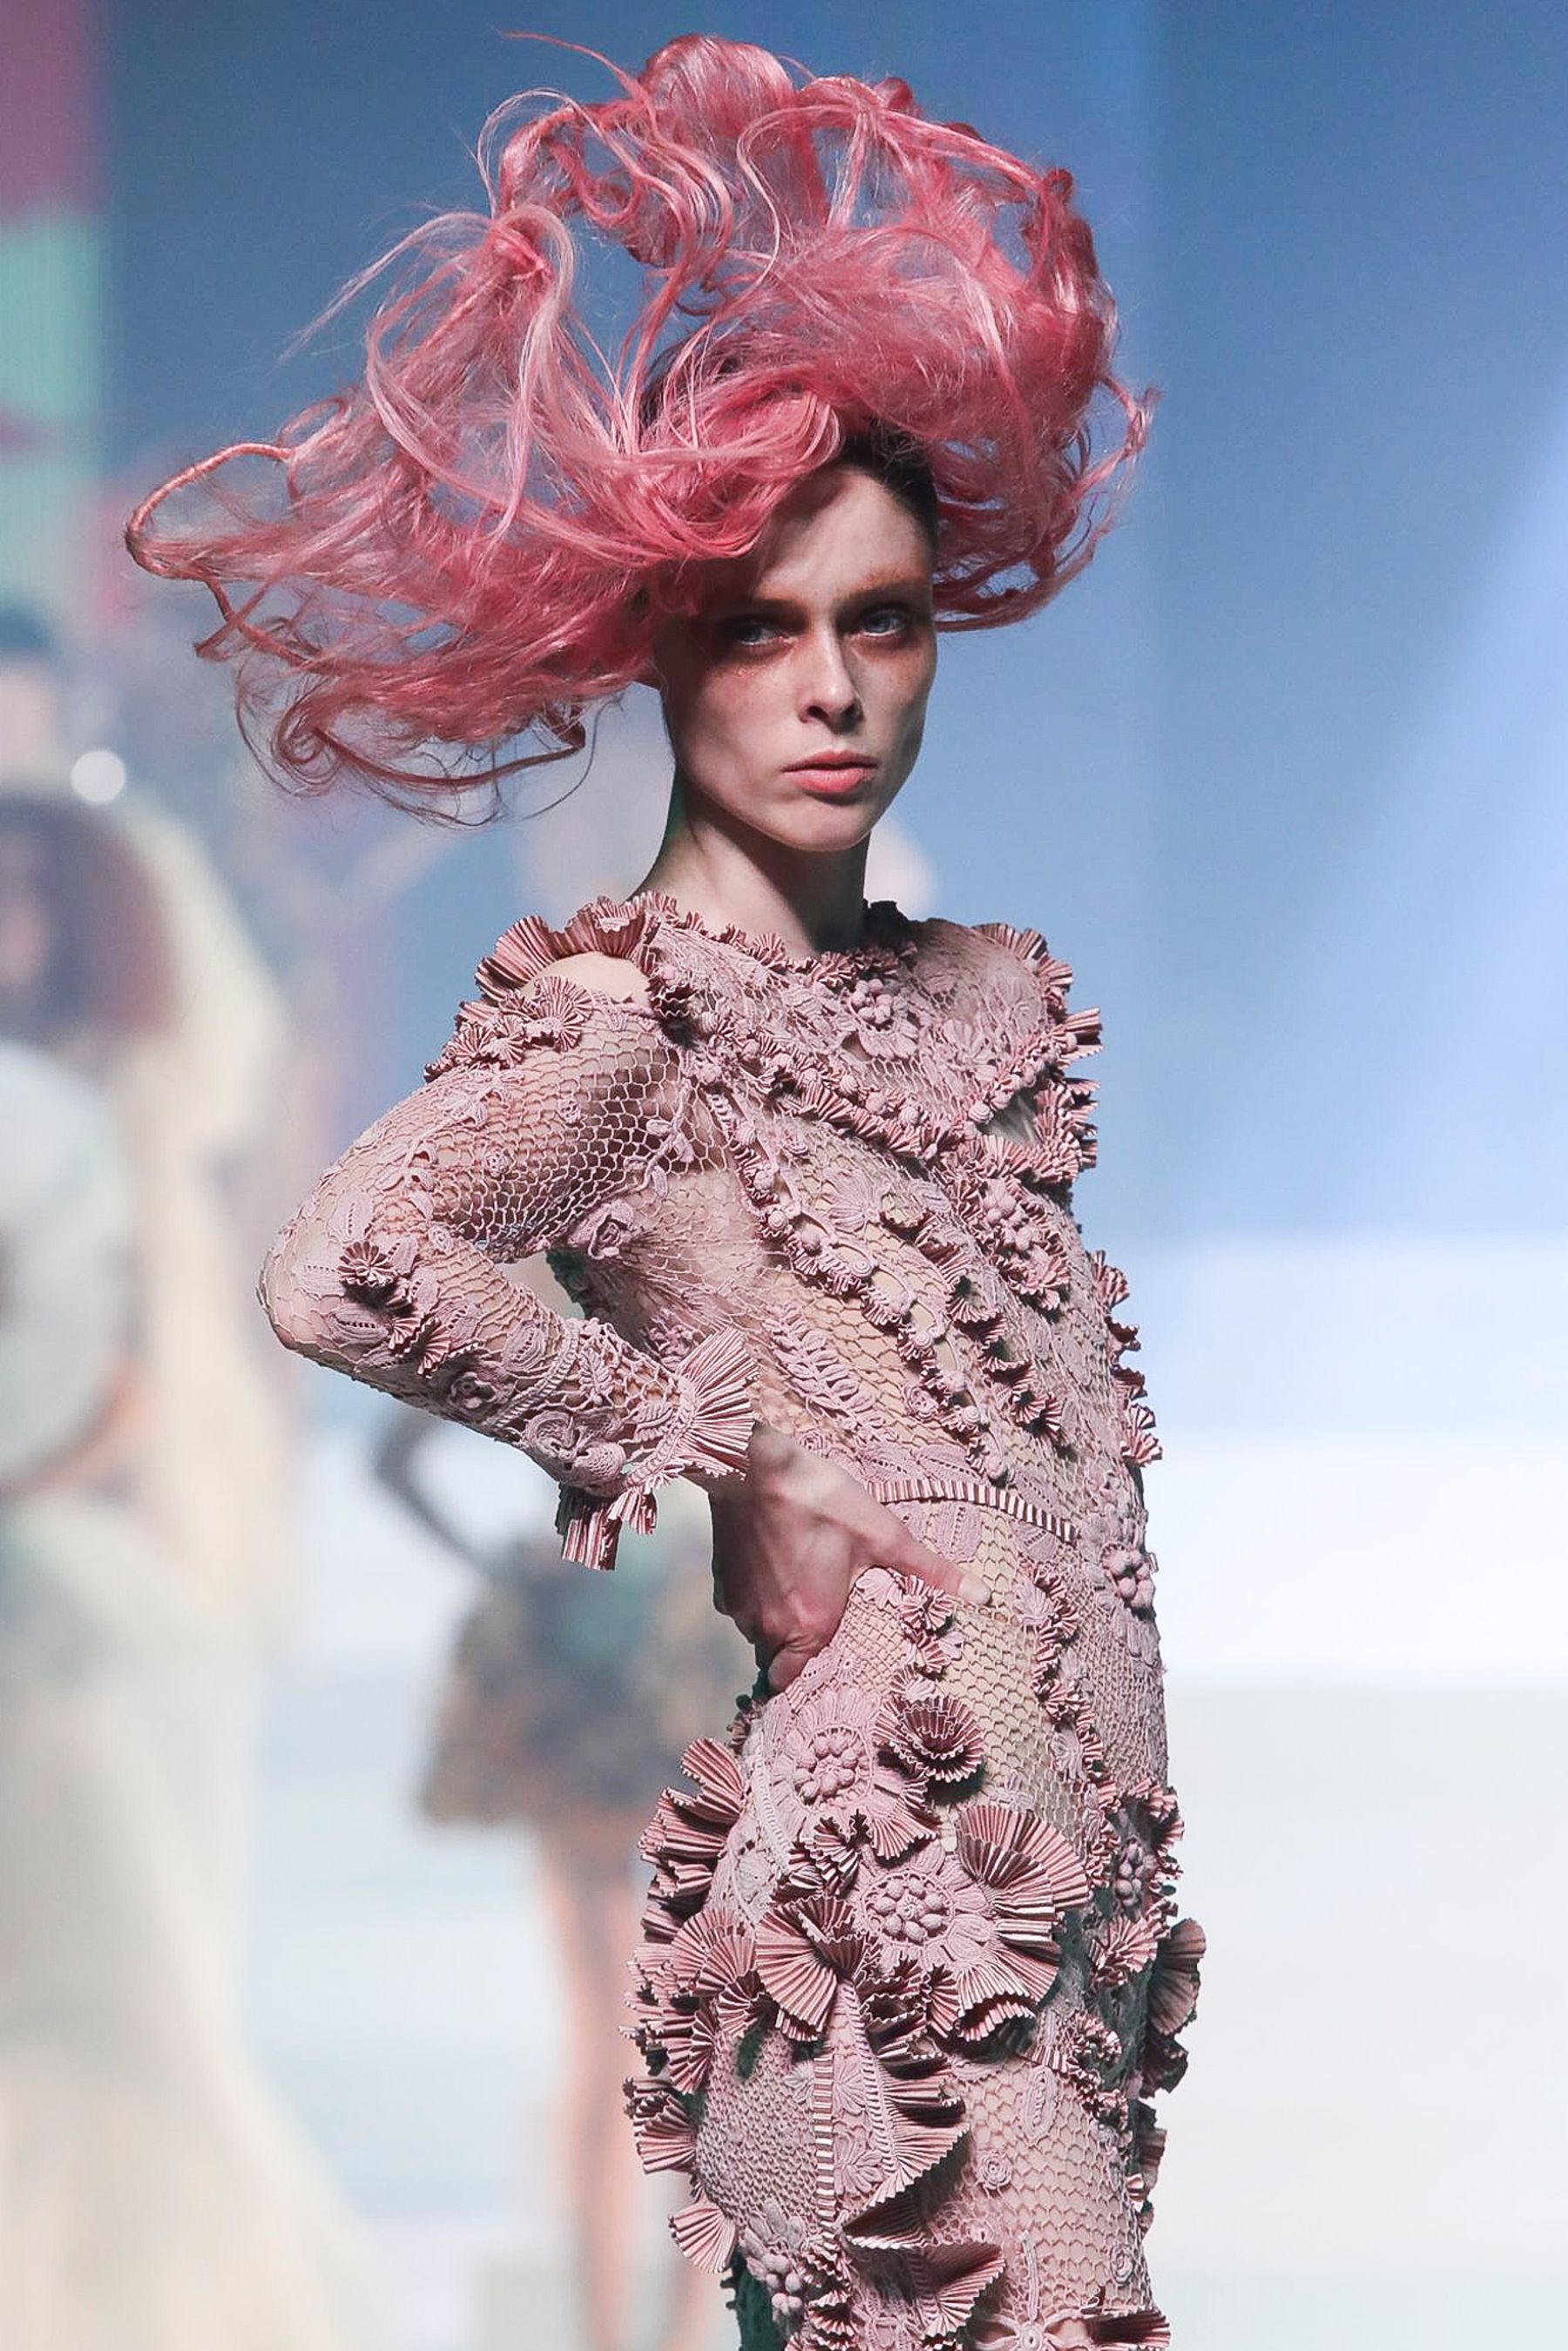 Jean Paul Gaultier Spring Summer 2020 Haute Couture Fashion Show